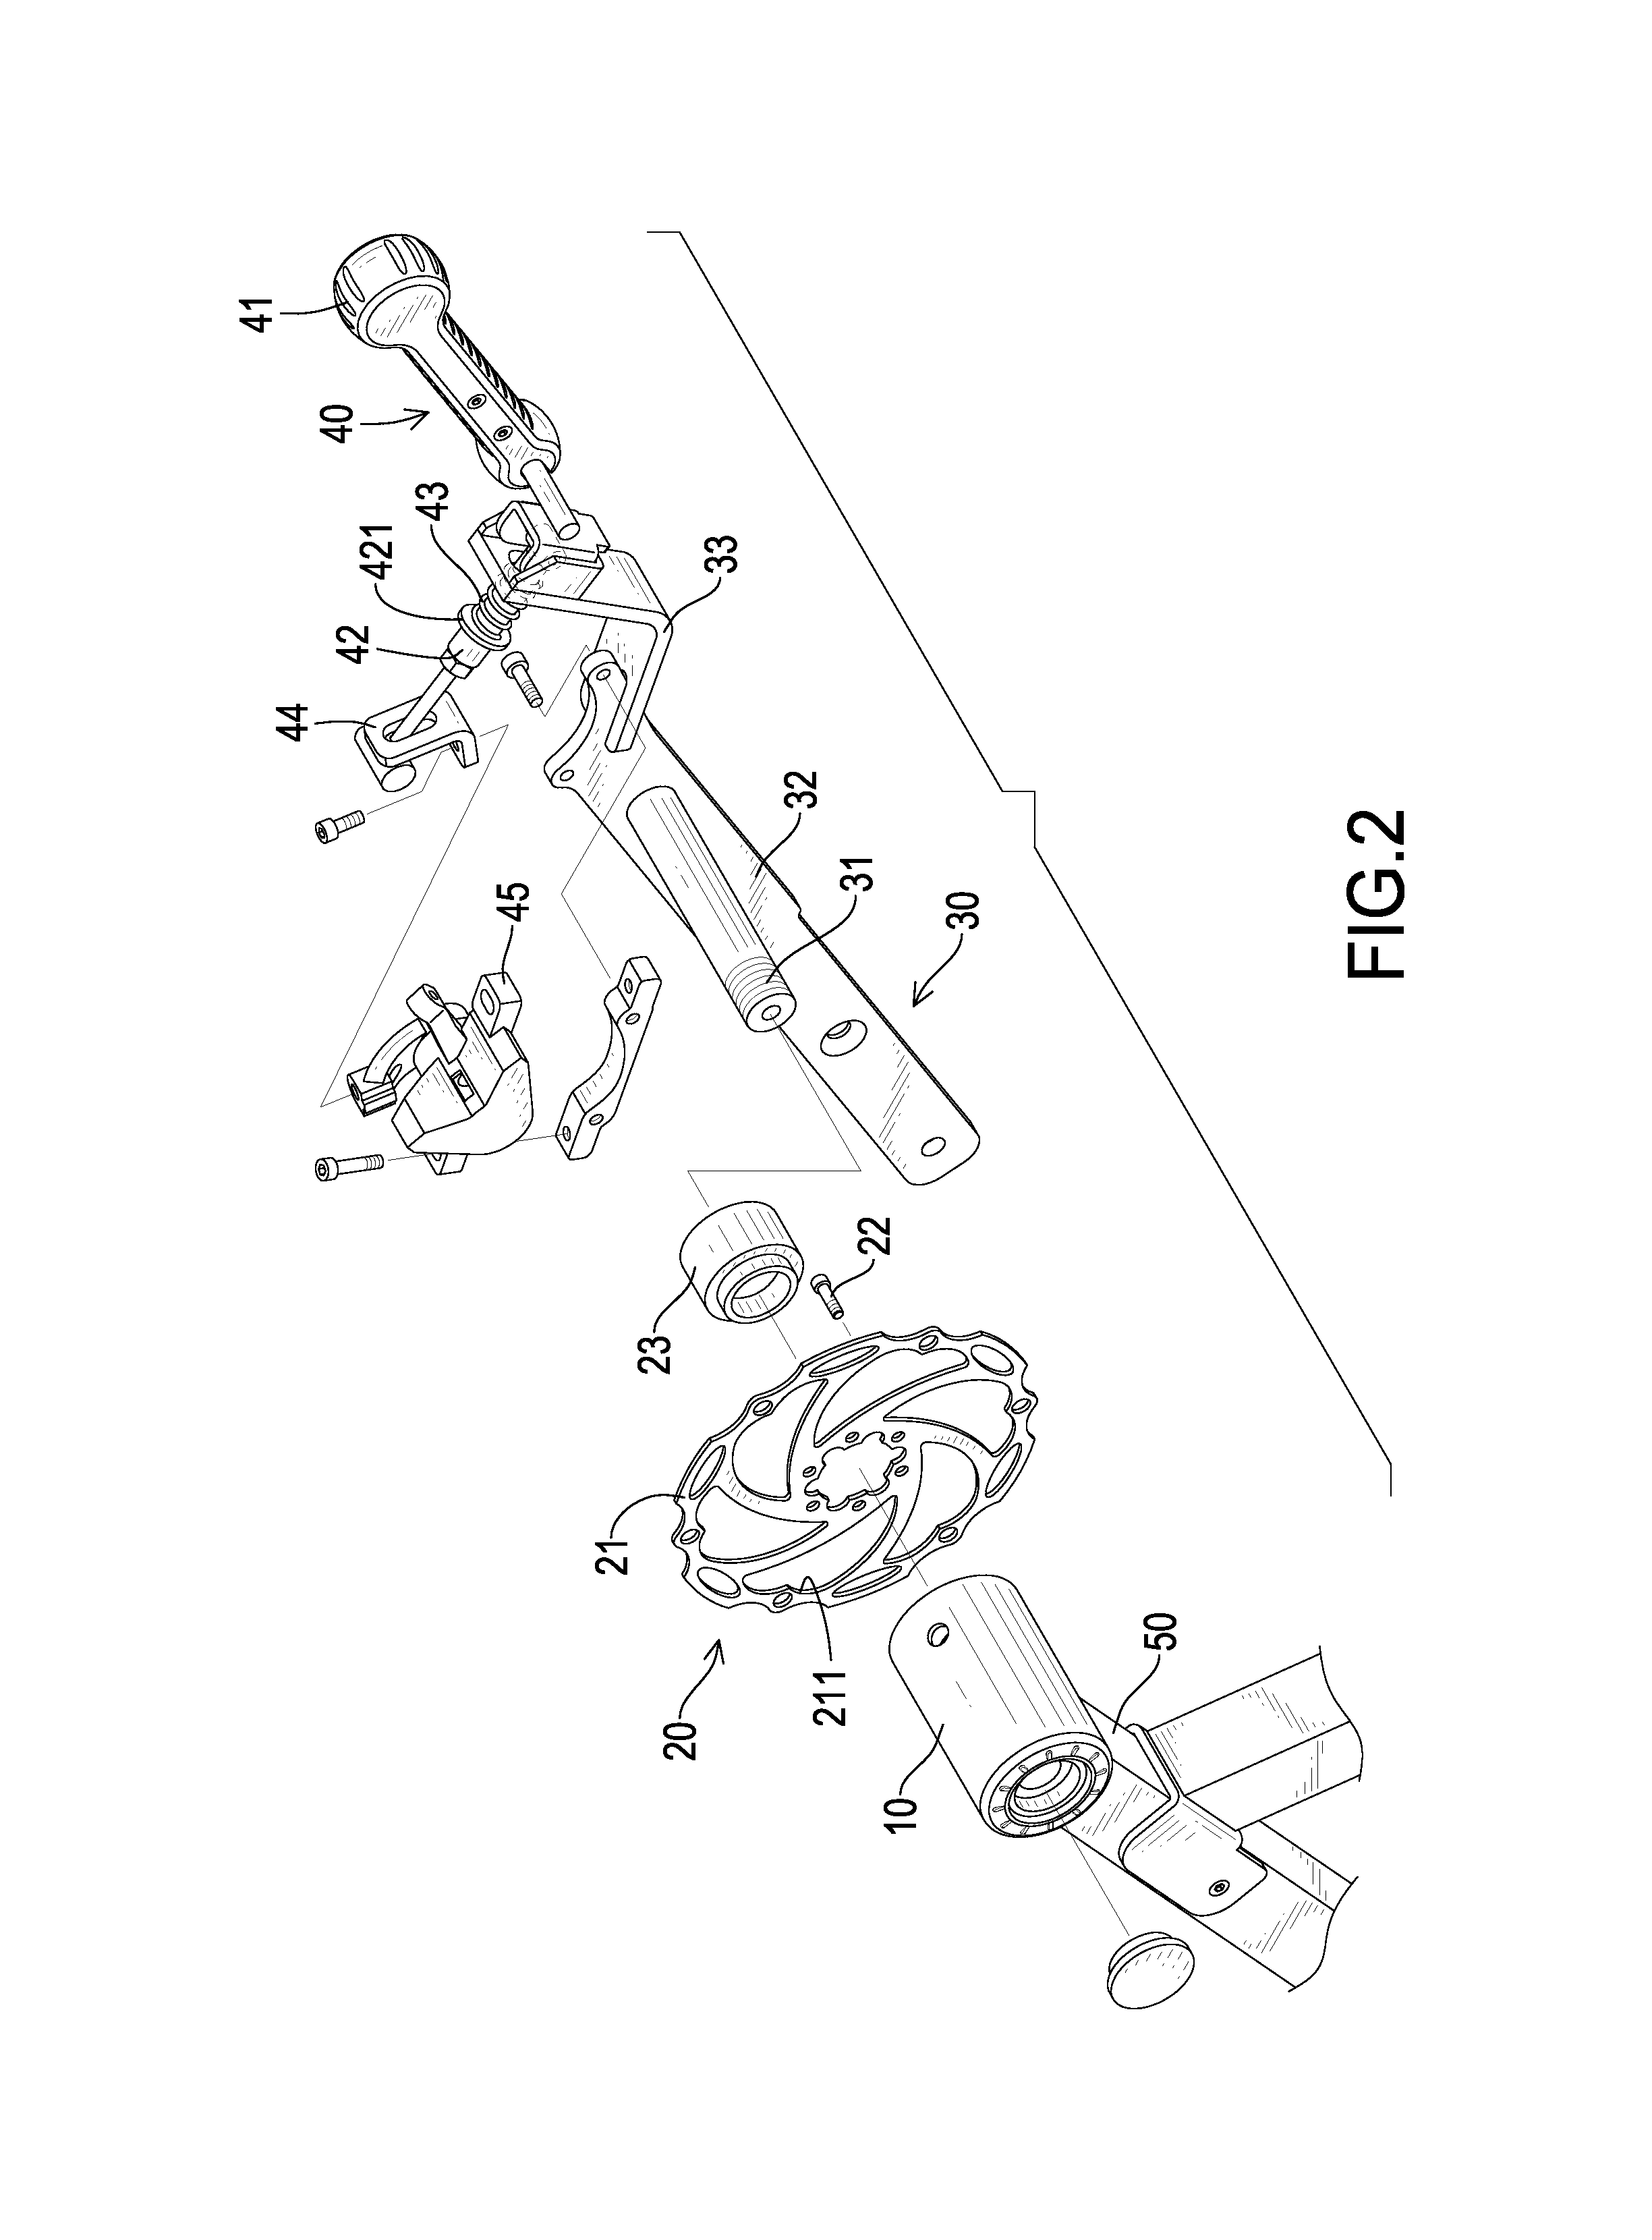 Disc brake device of an inversion table